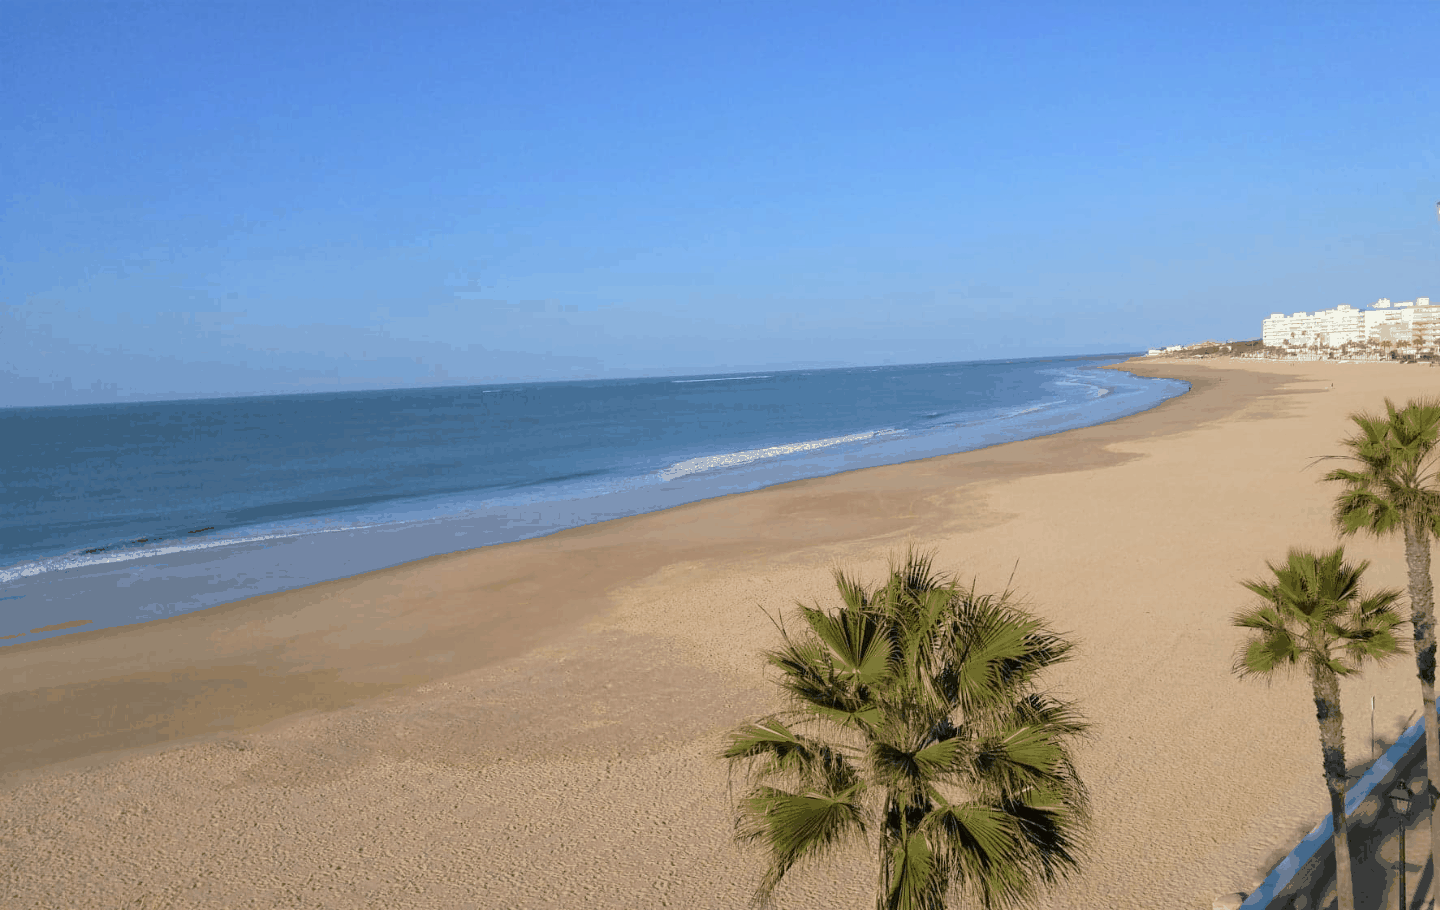 A long stretch of wide, sandy beach and palm trees in Rota, Spain